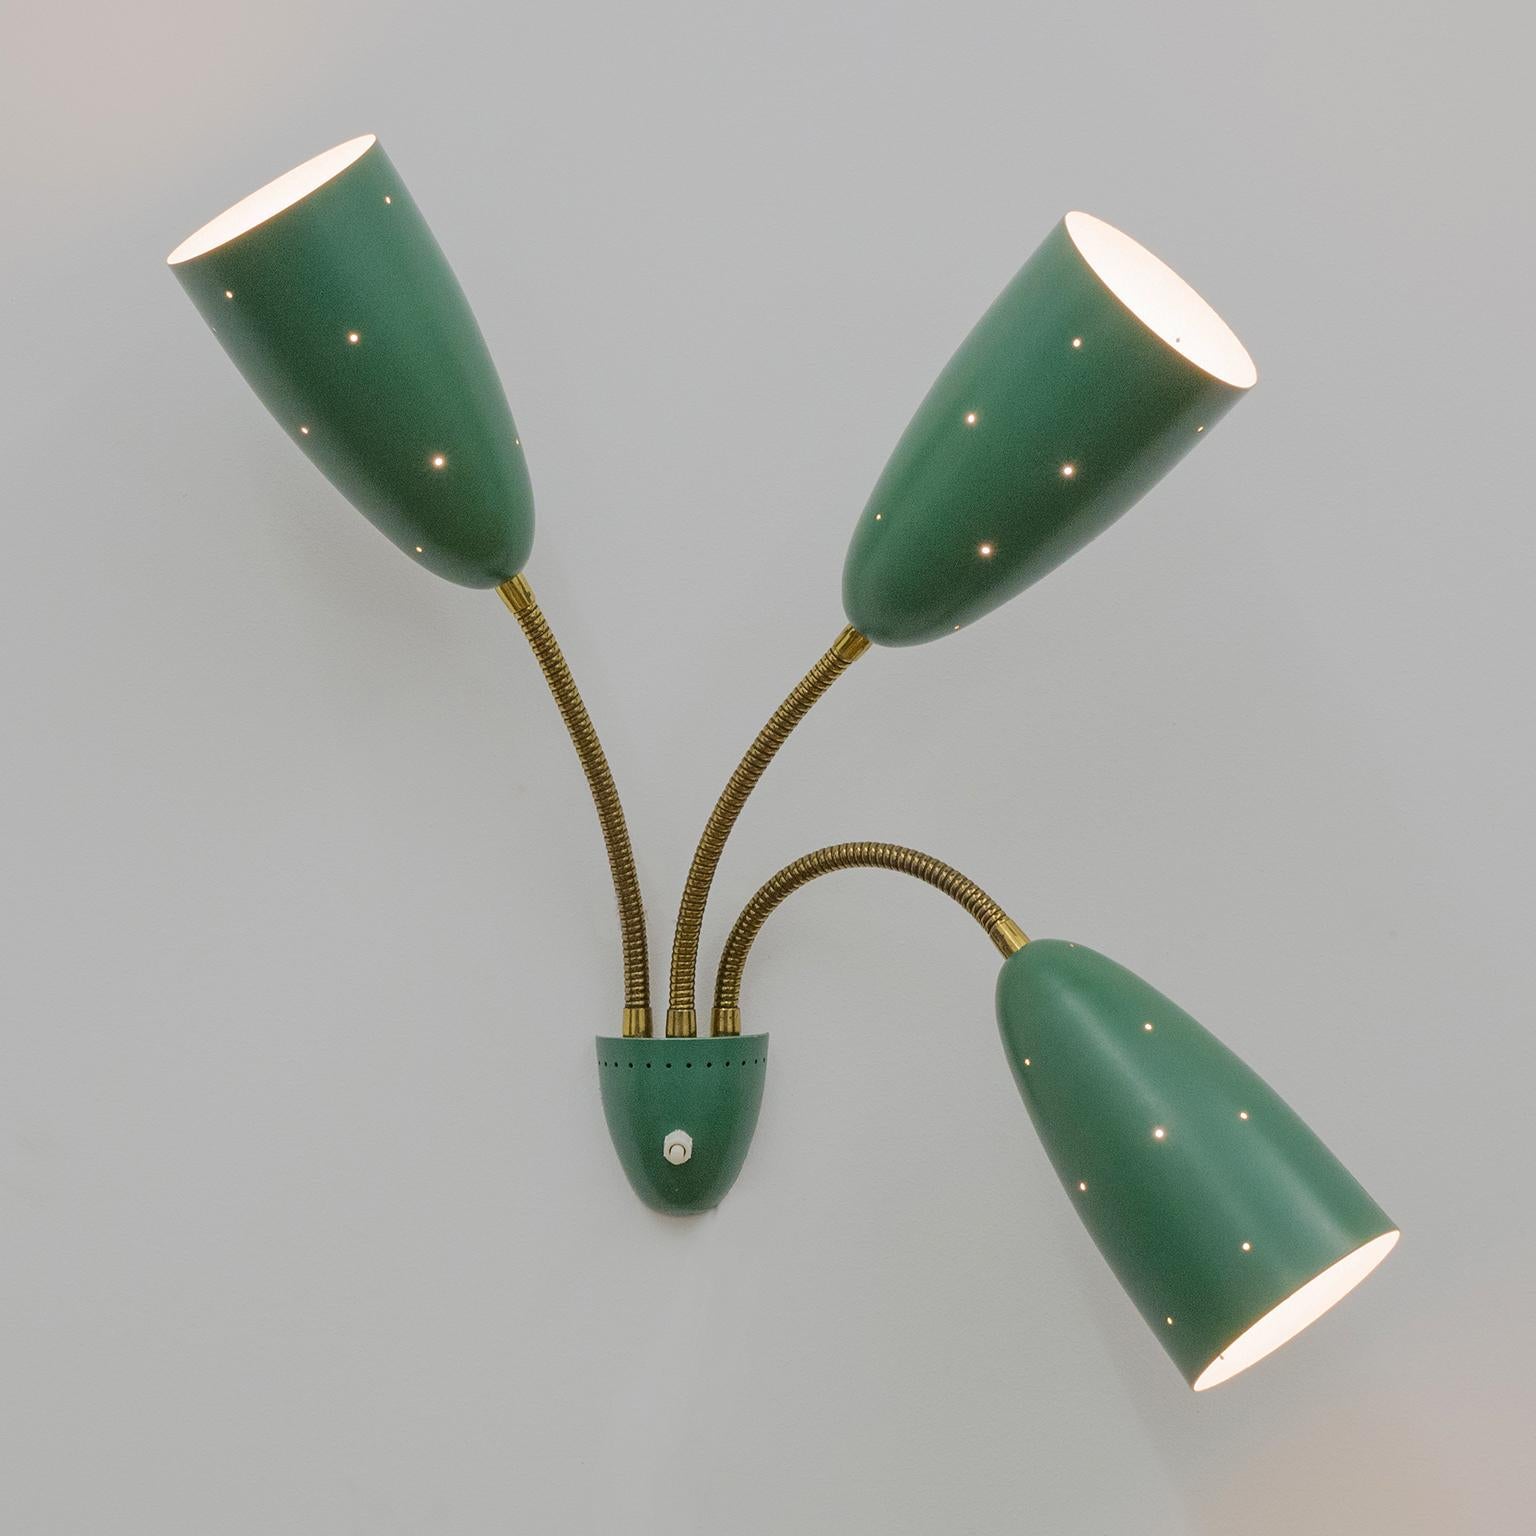 Beautiful midcentury wall light with three large pierced cones on brass 'goose necks'. Wonderful original condition with only very minor usage signs on the original lacquer. The cones measure 7.5inches/19cm in length and have a diameter of